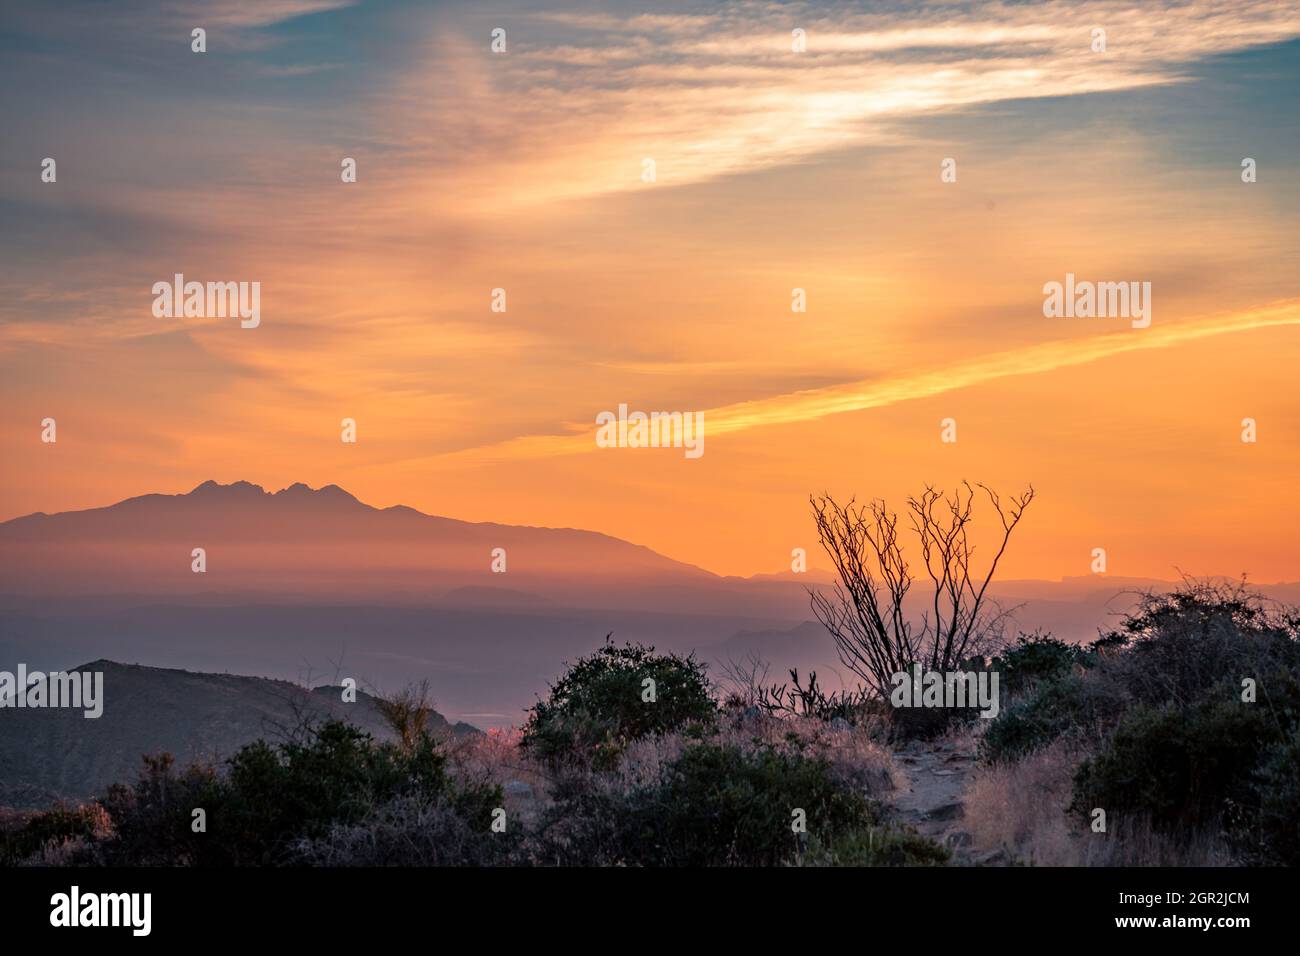 Scenic View Of Silhouette Mountains Against Orange Sky During Sunrise Stock Photo